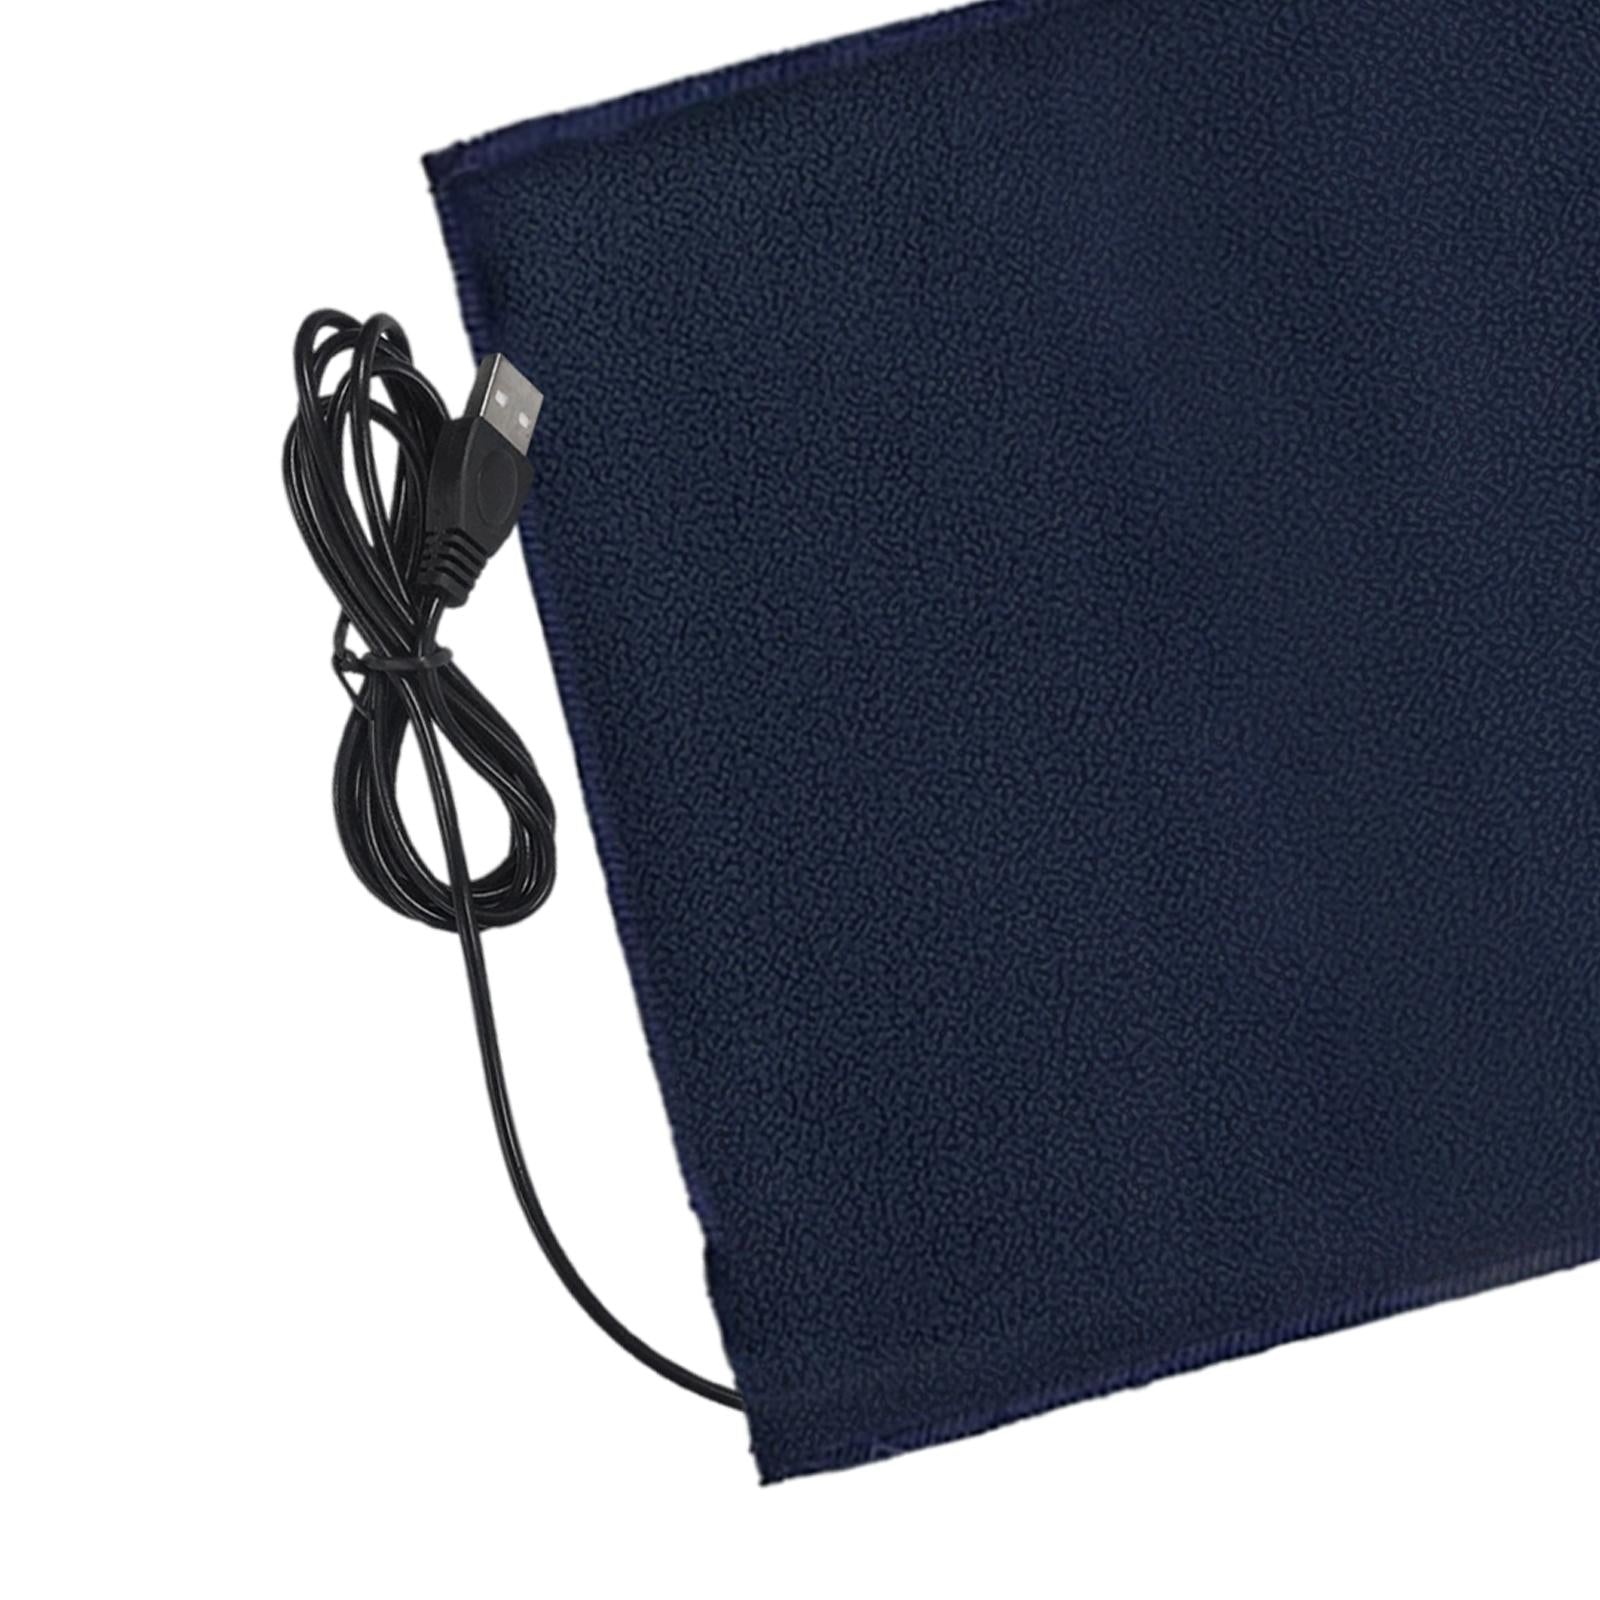 USB Electric Heating Pad Foldable Washable Adjustable for Shoulders blue